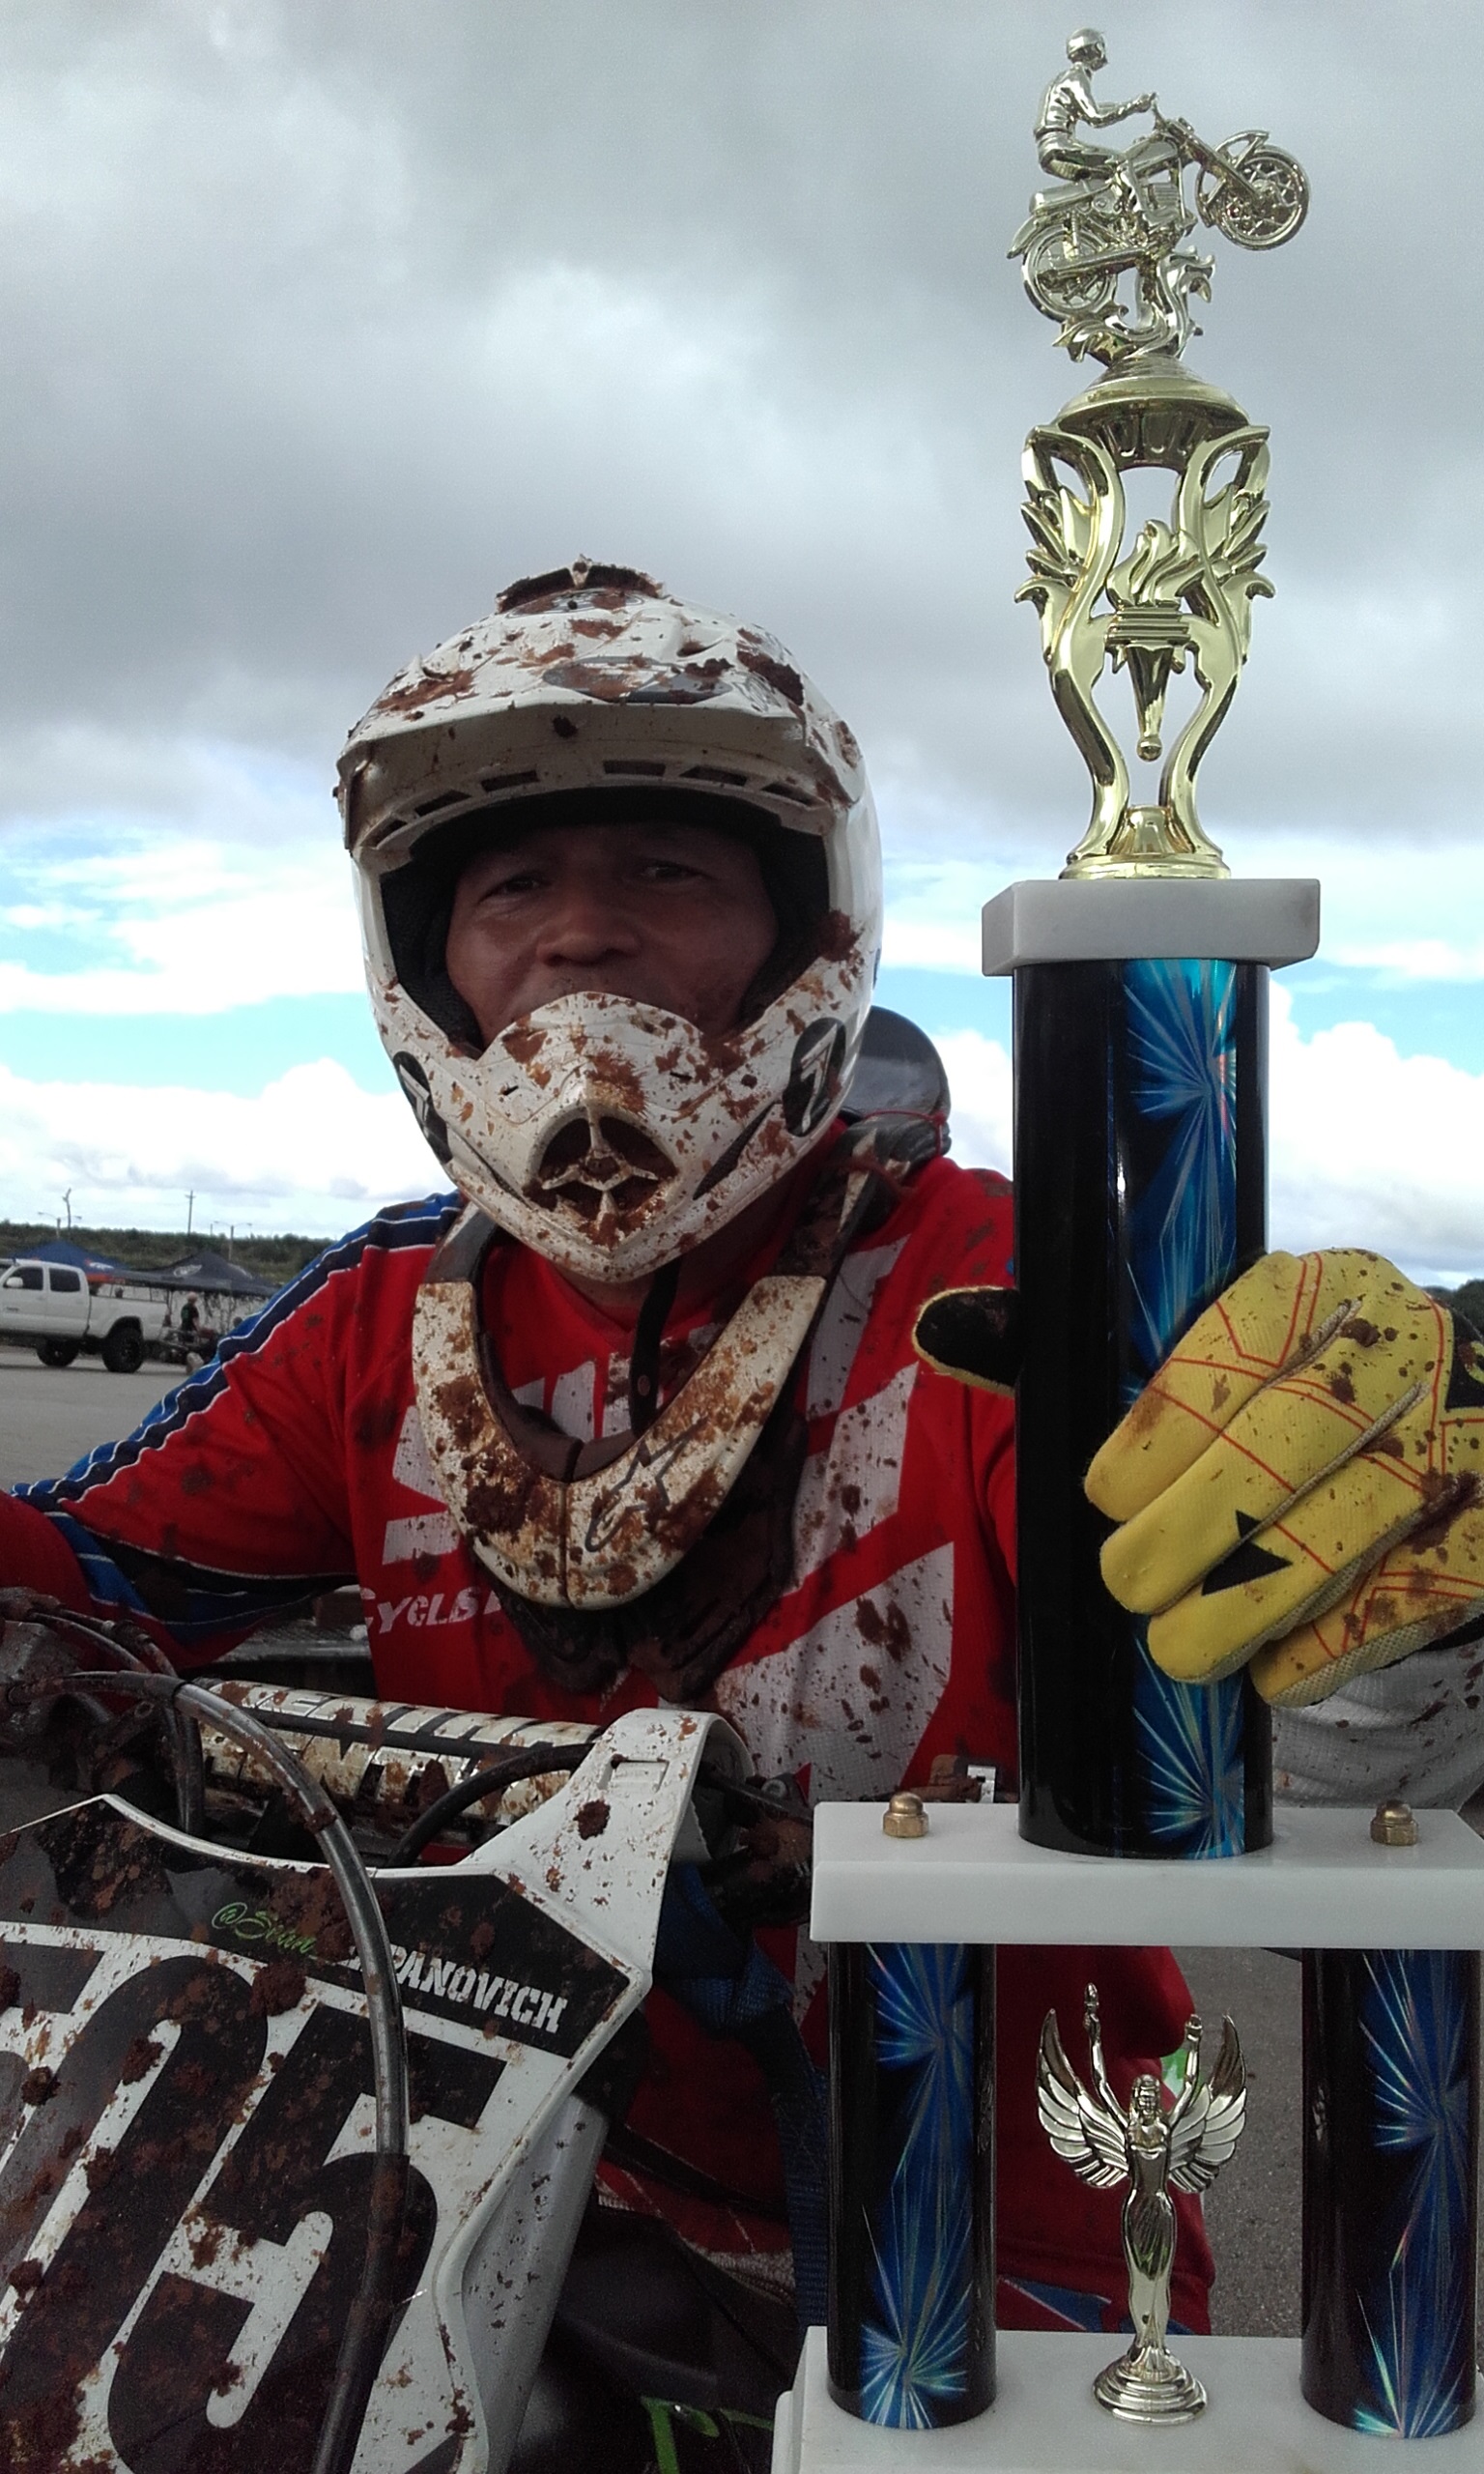 Jeff Rios took the win this past Sunday in the Over 40 Vet class